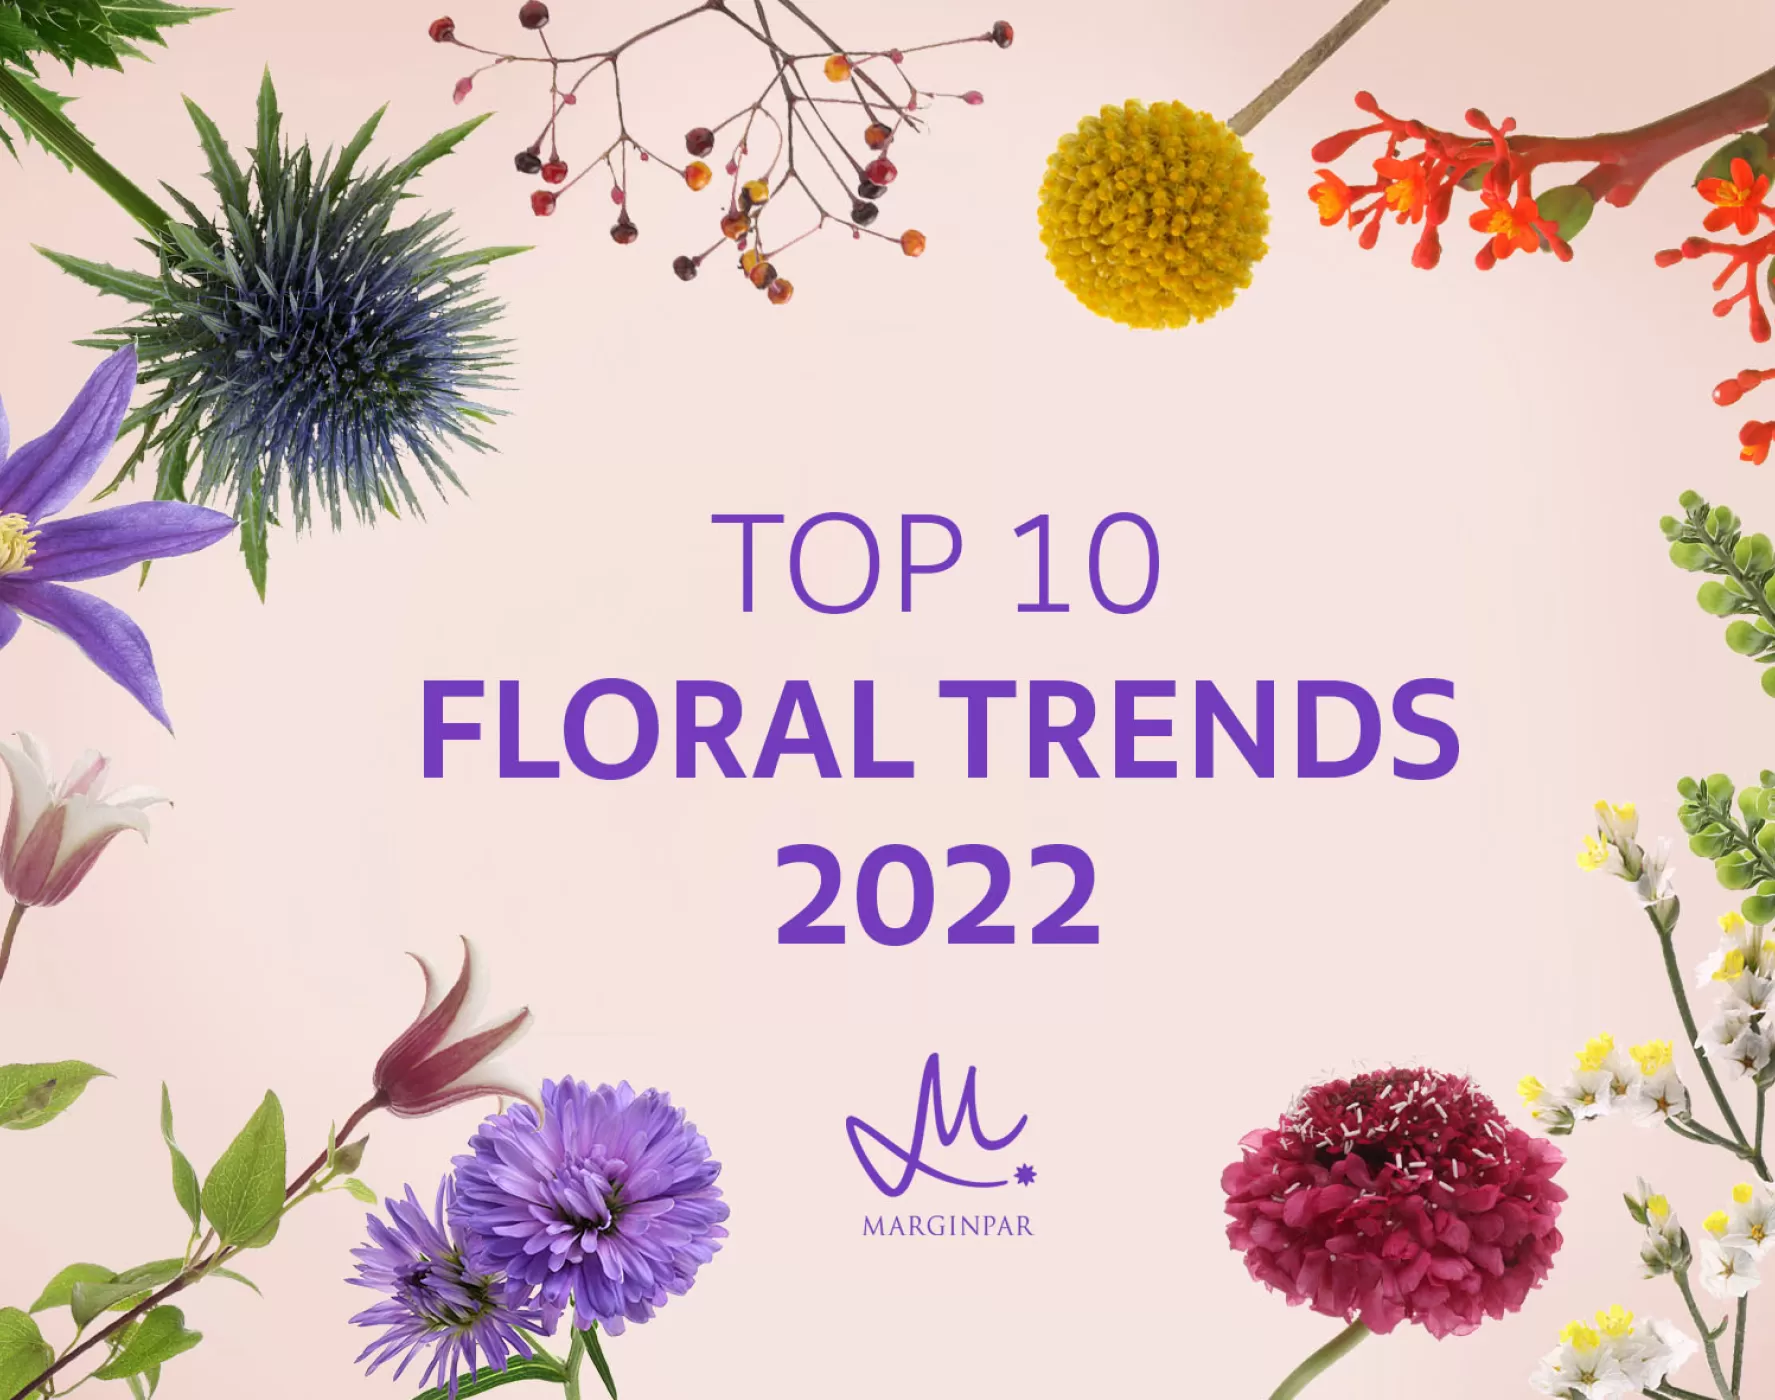 The Next Trend in Floral Design Will Be Botanical Embroidery